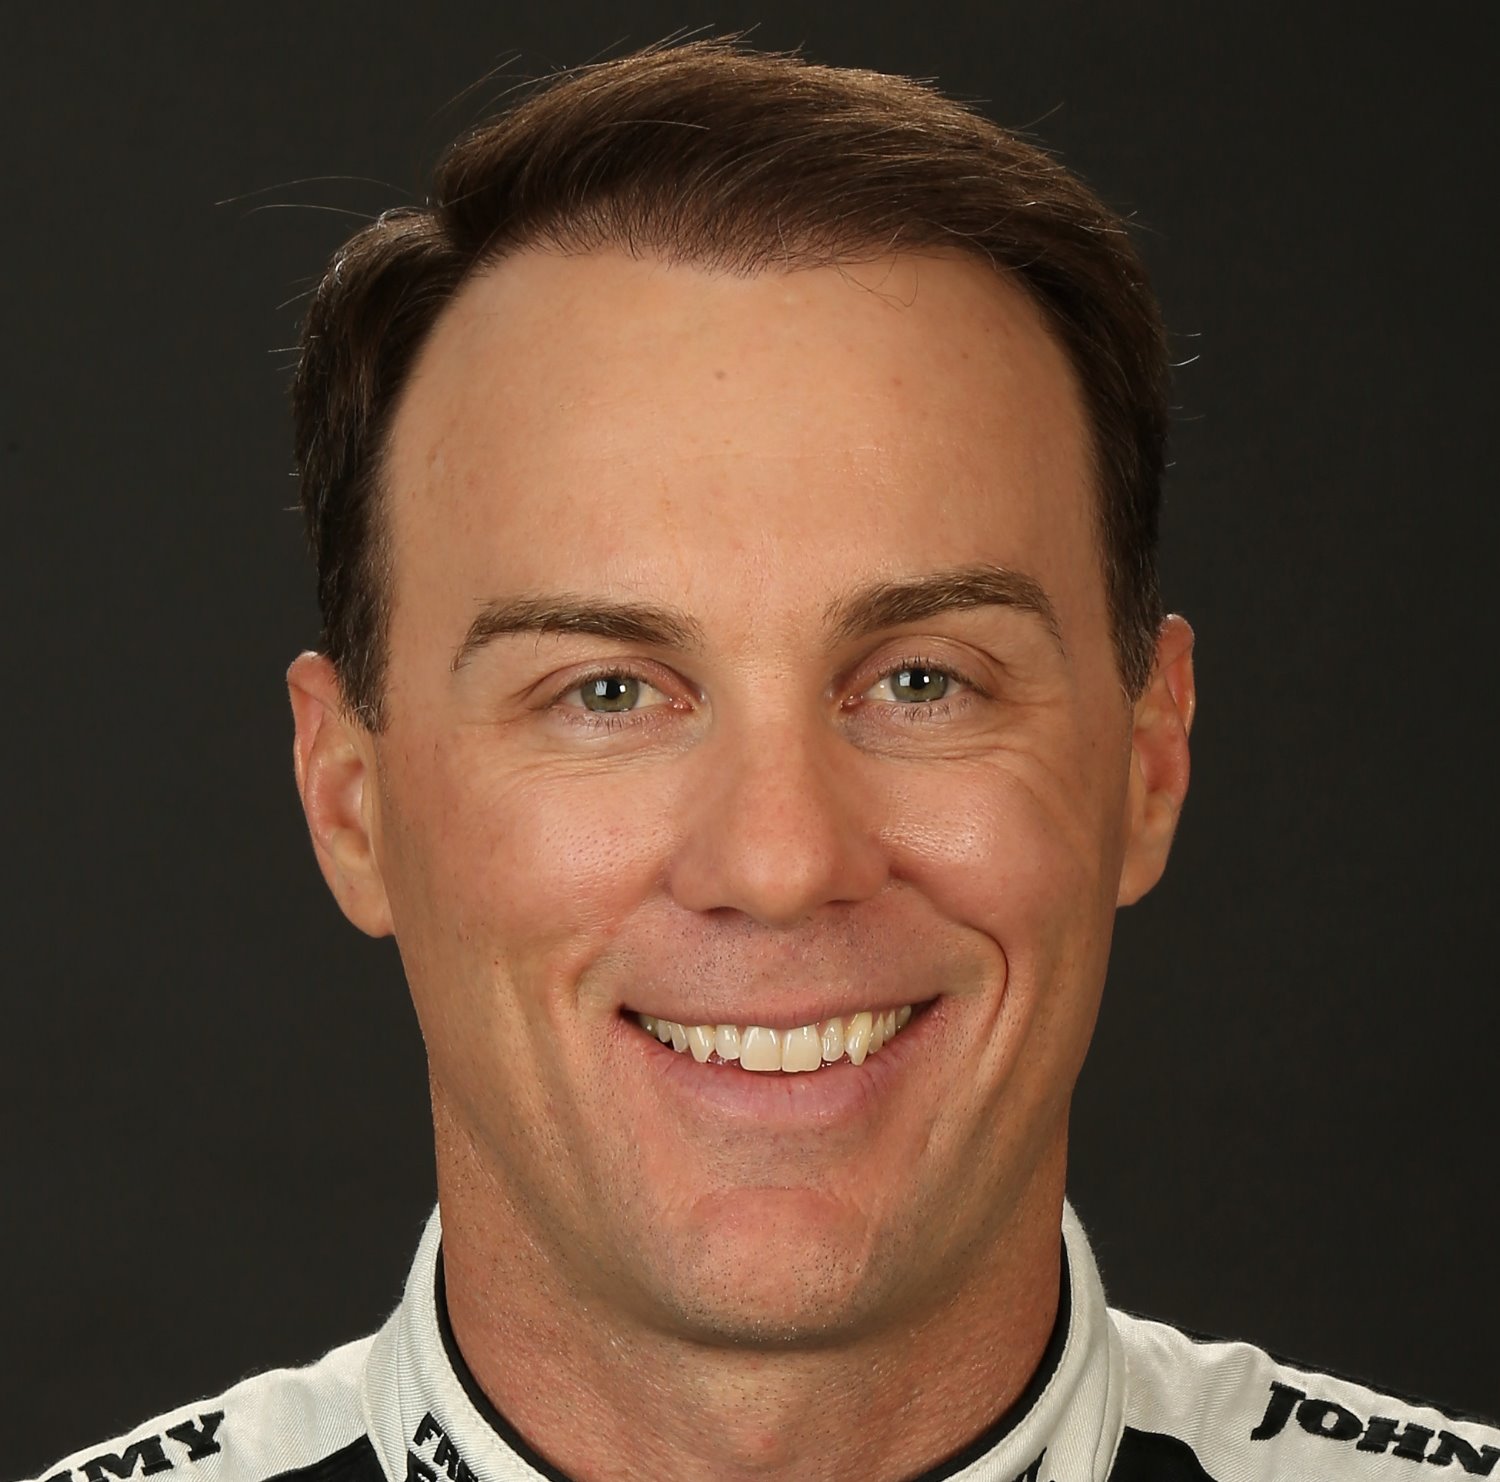 Harvick to start from pole